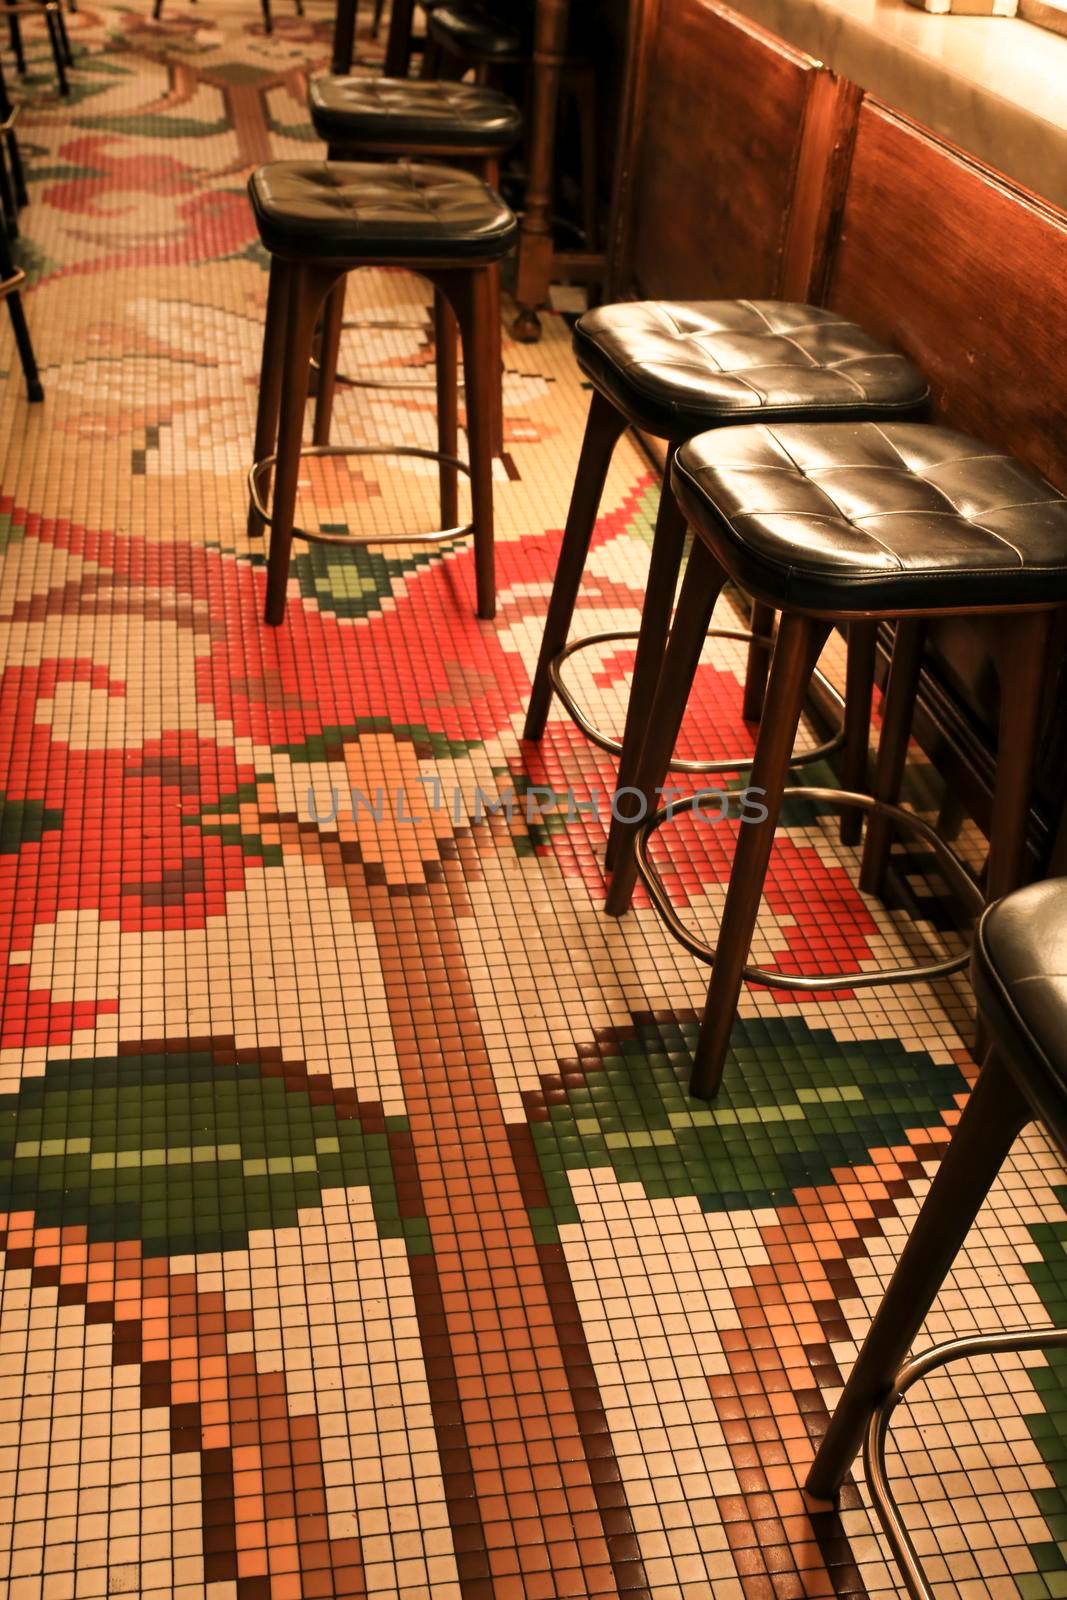 Alicante, Spain- June 26, 2022: Mosaic floor of the Manero bar in Alicante with beautiful colonial style